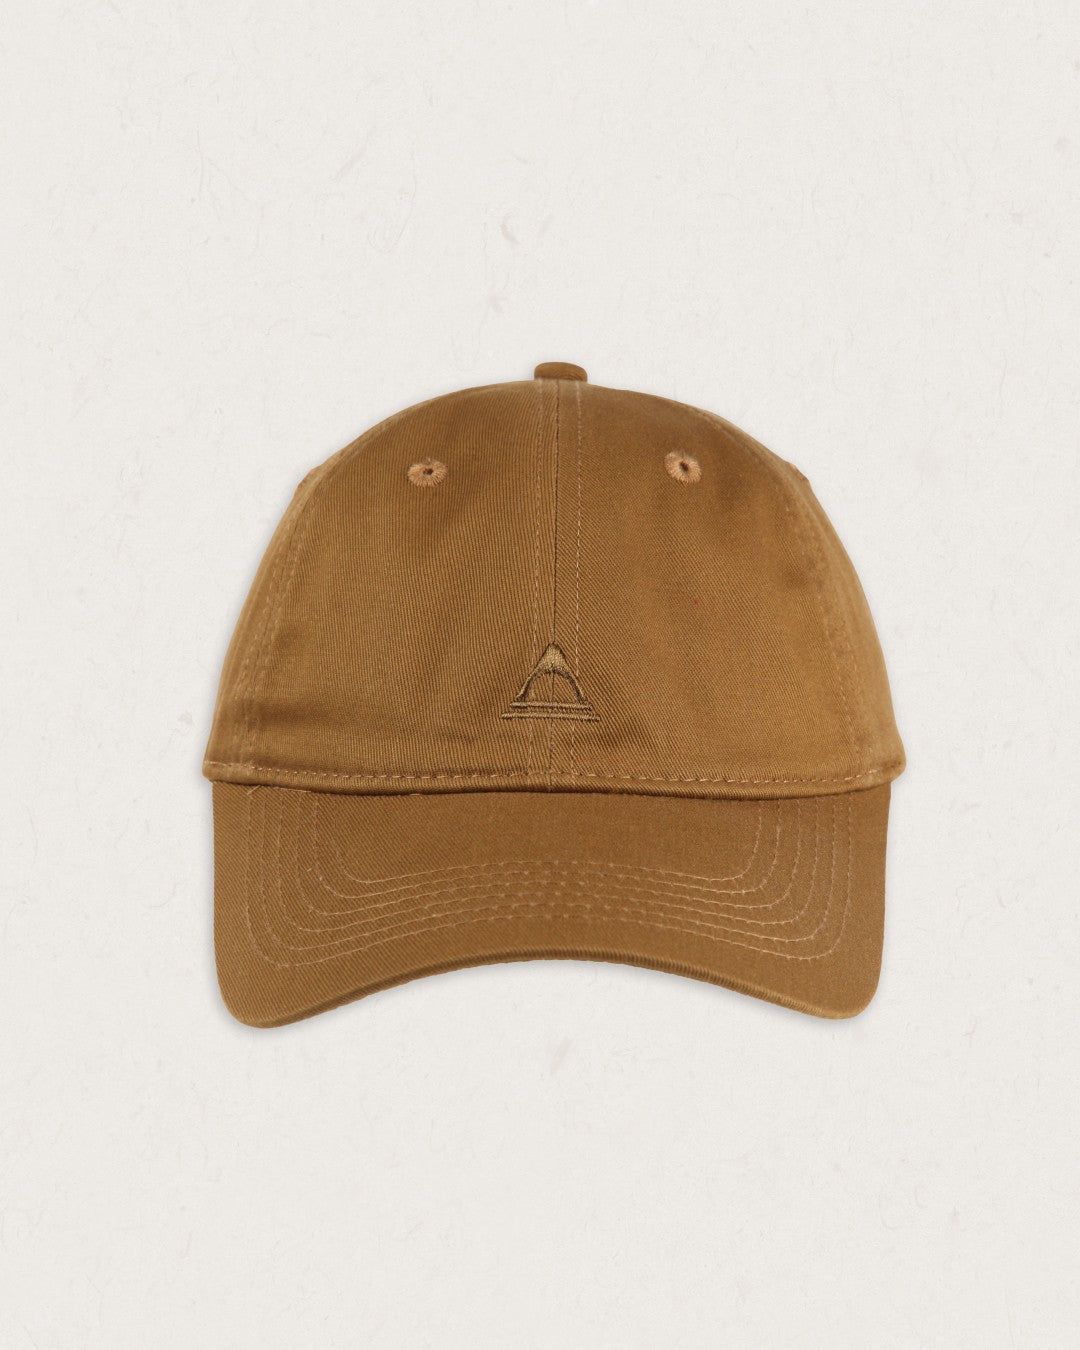 Fade Recycled Cotton 6 Panel Cap - Mustard Gold